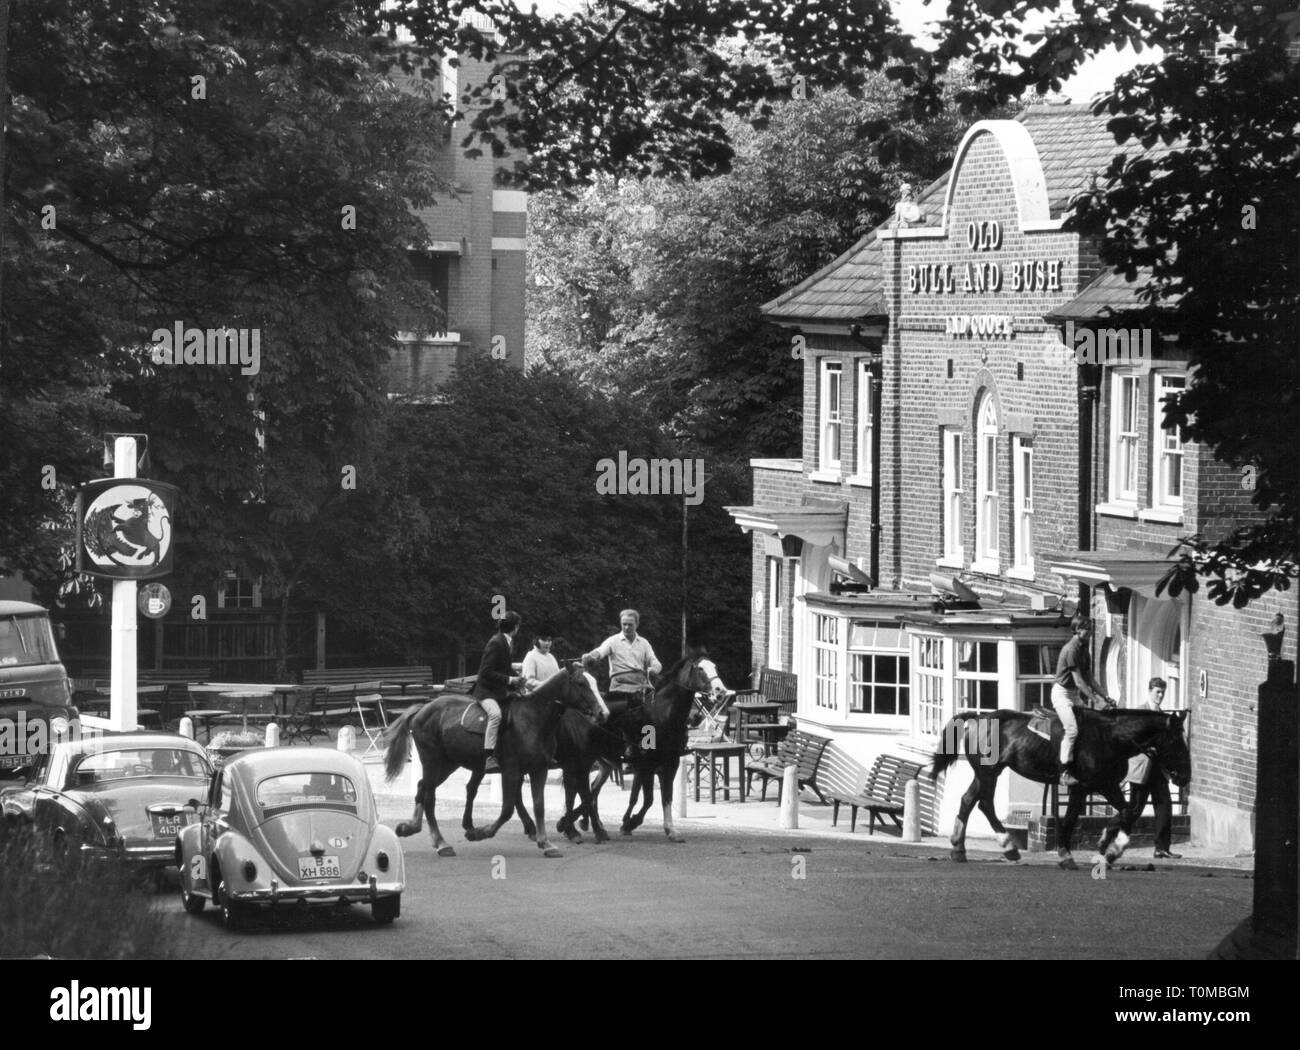 leisure time, riding, riders at the Old Bull and Bush pub, North Hampstead, London, September 1966, Additional-Rights-Clearance-Info-Not-Available Stock Photo